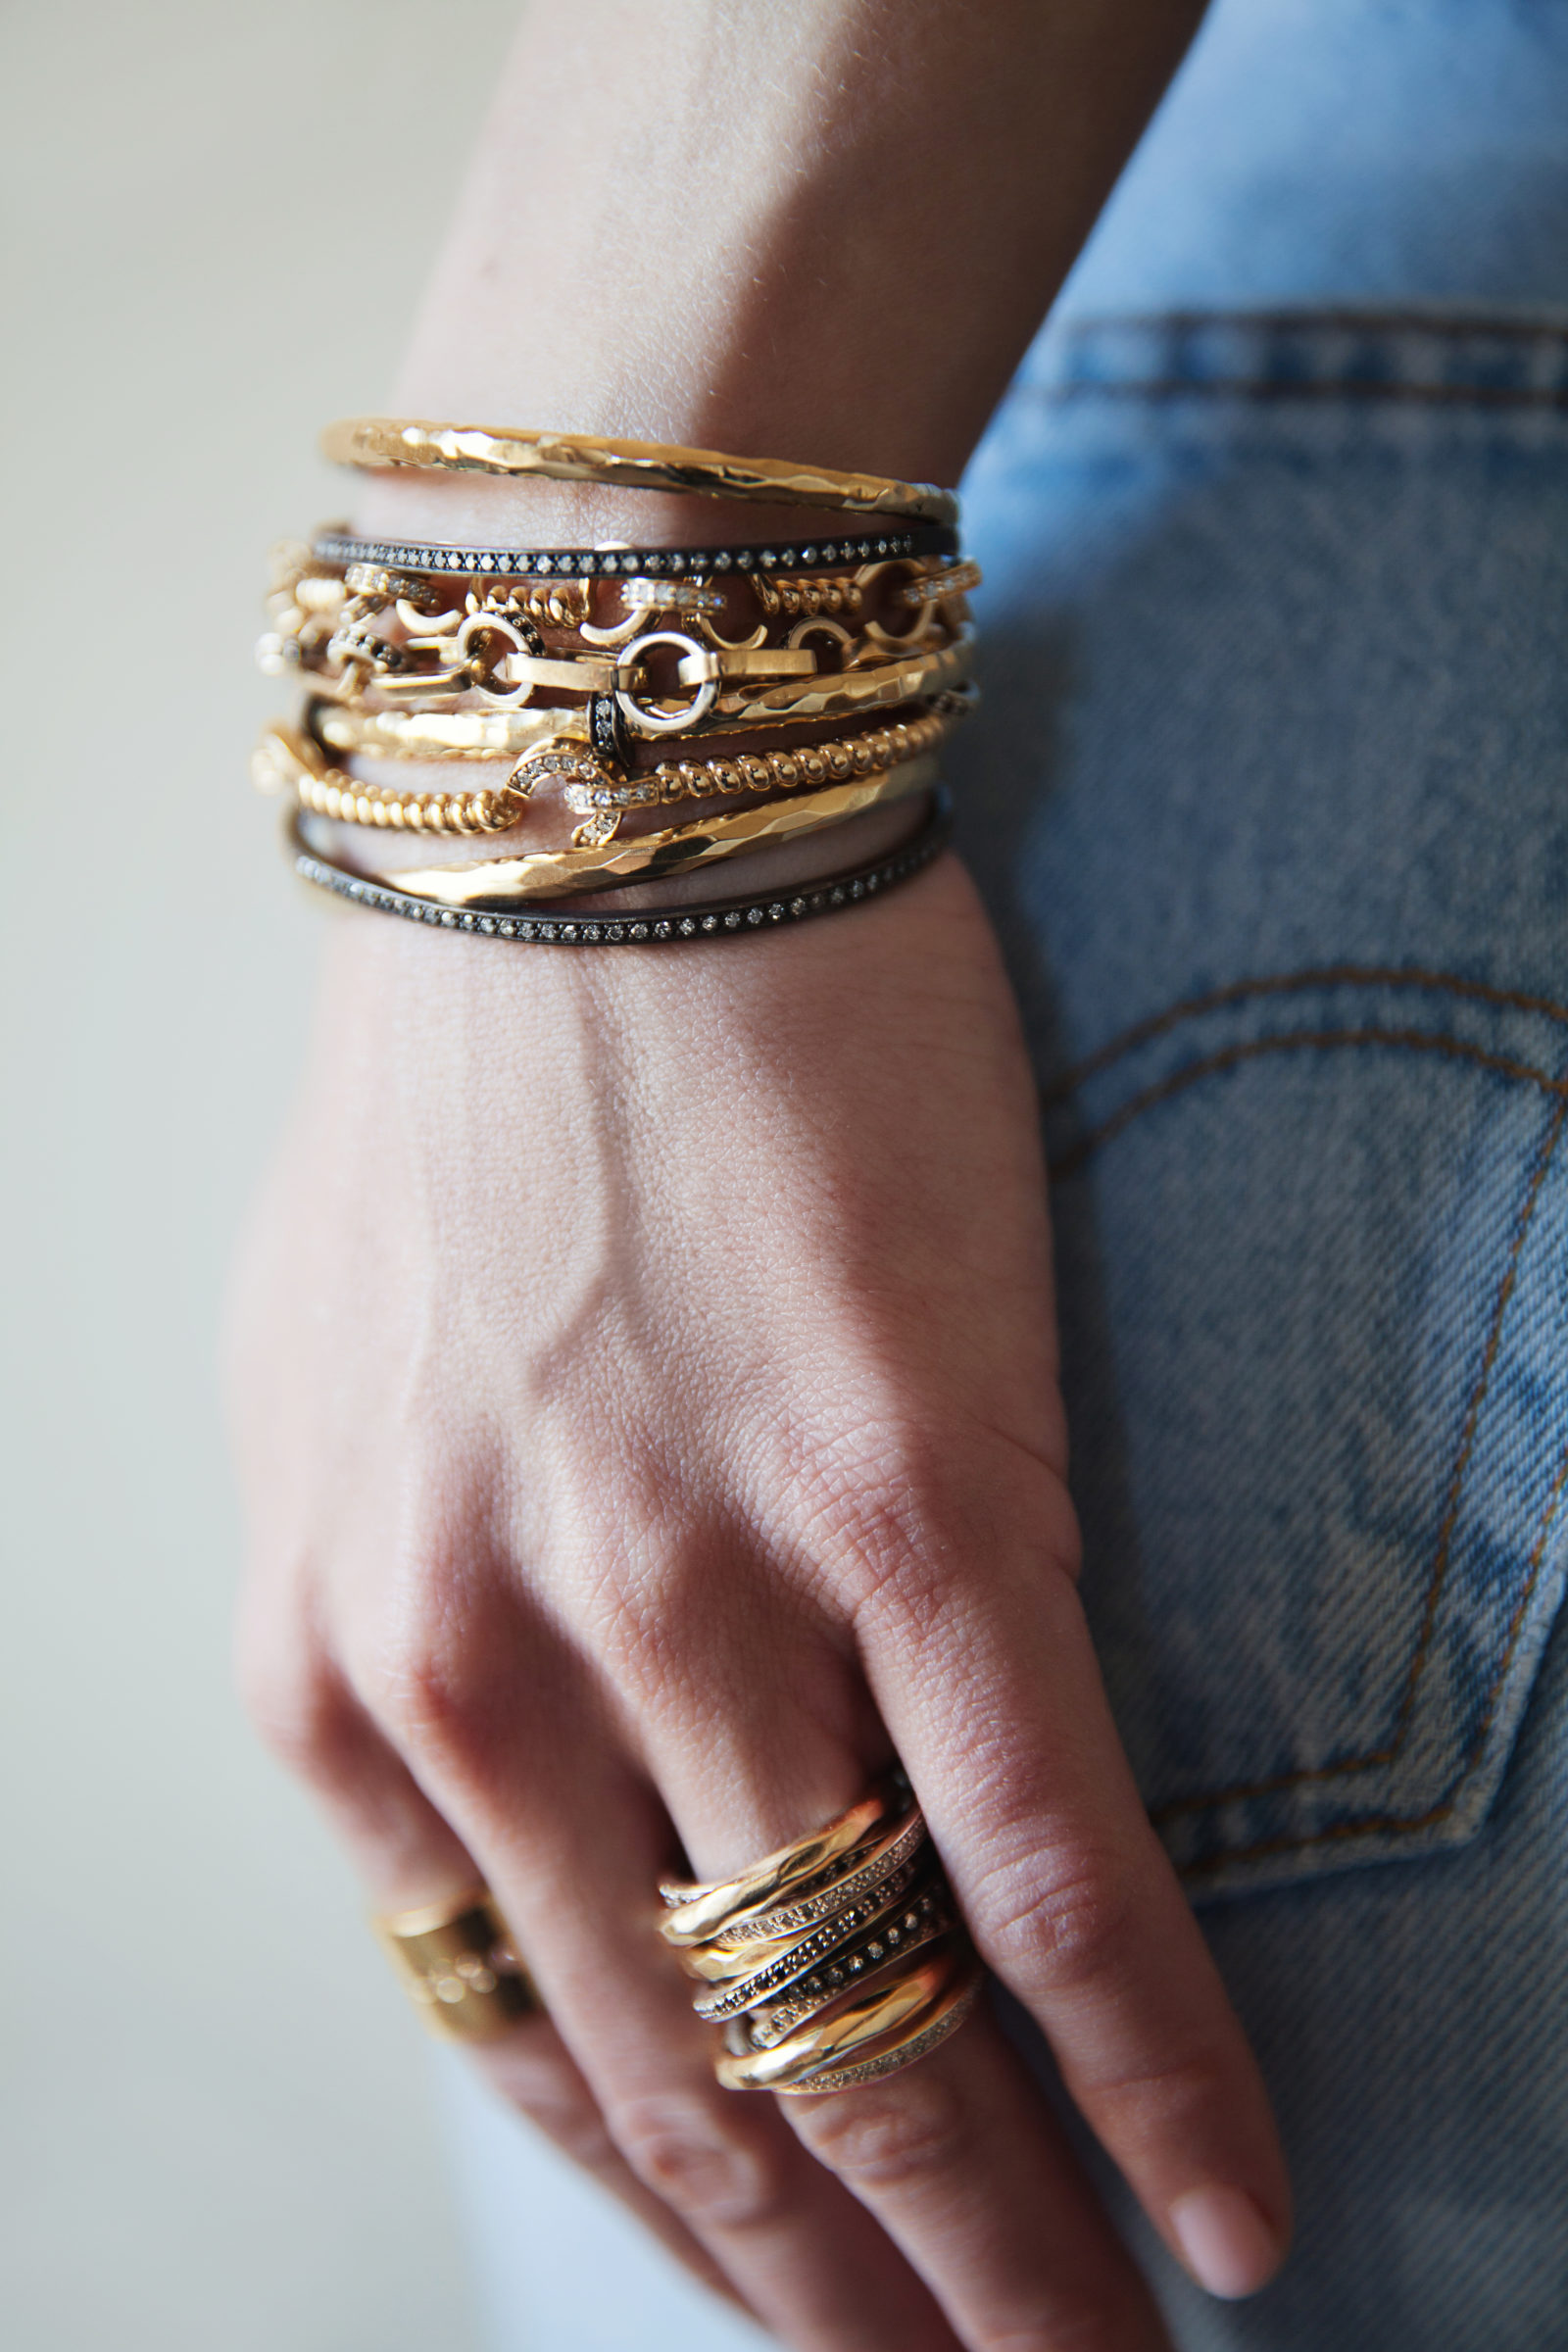 Stacked bracelets as mother's day gifts that give back